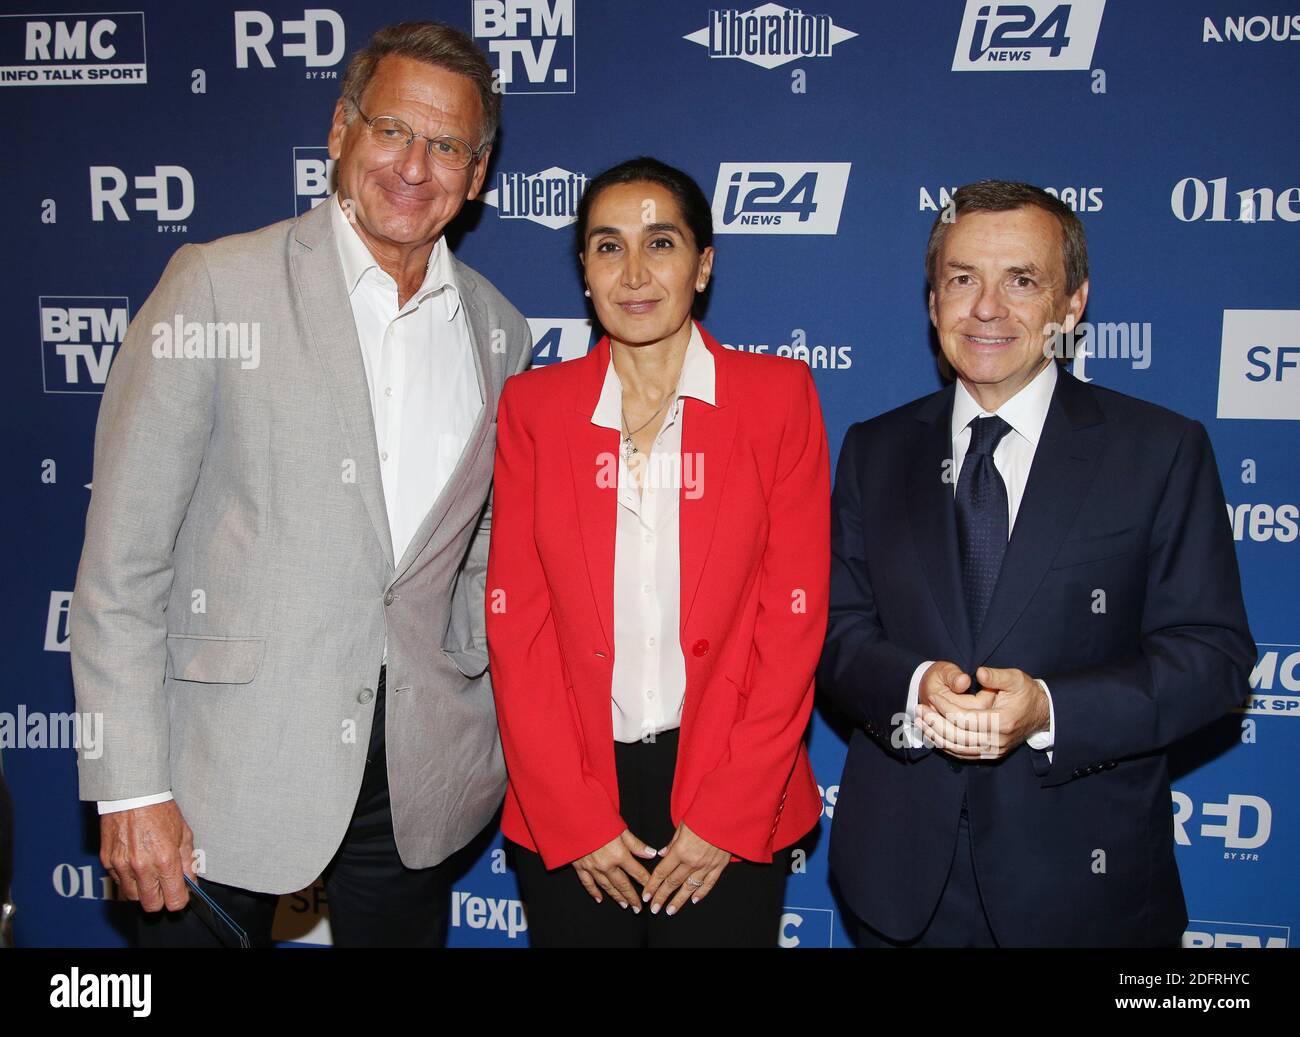 Jean-Paul Baudecroux with his wife and Alain Weill attending Altice Campus  Opening in Paris on October 09, 2018. Photo by Jerome Domine/ABACAPRESS.COM  Stock Photo - Alamy